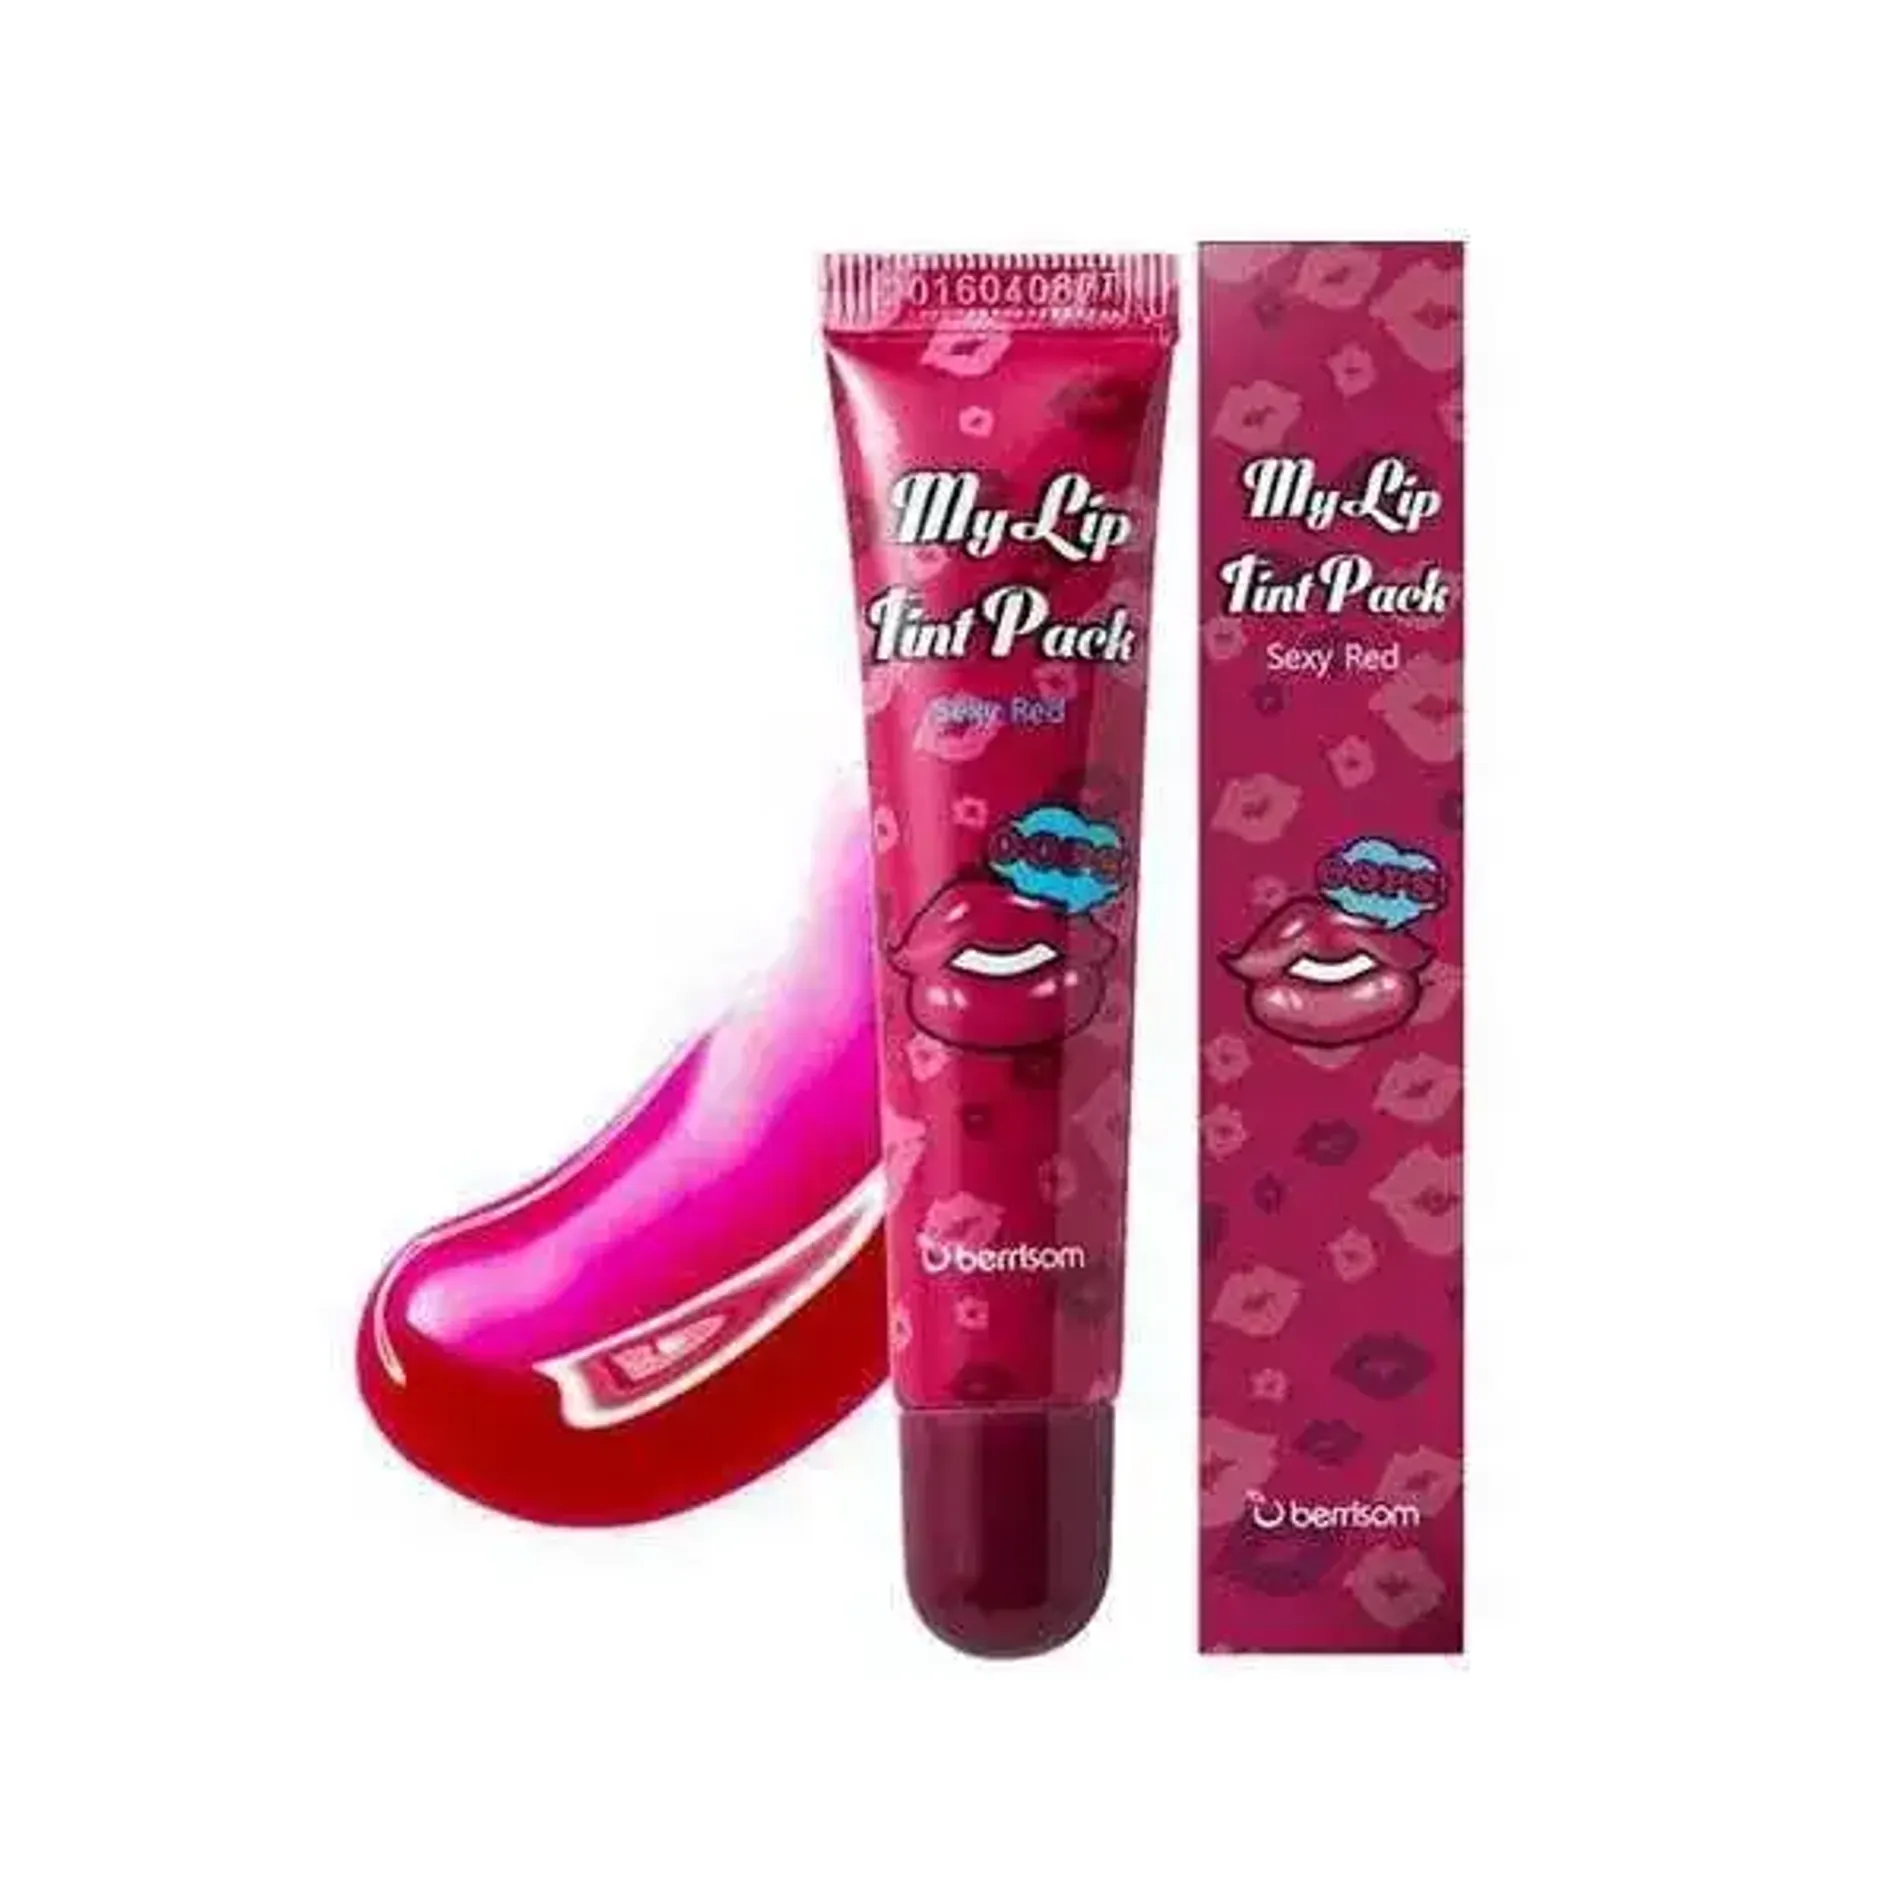 son-xam-berrisom-oops-my-lip-tint-pack-sexy-red-15g-1